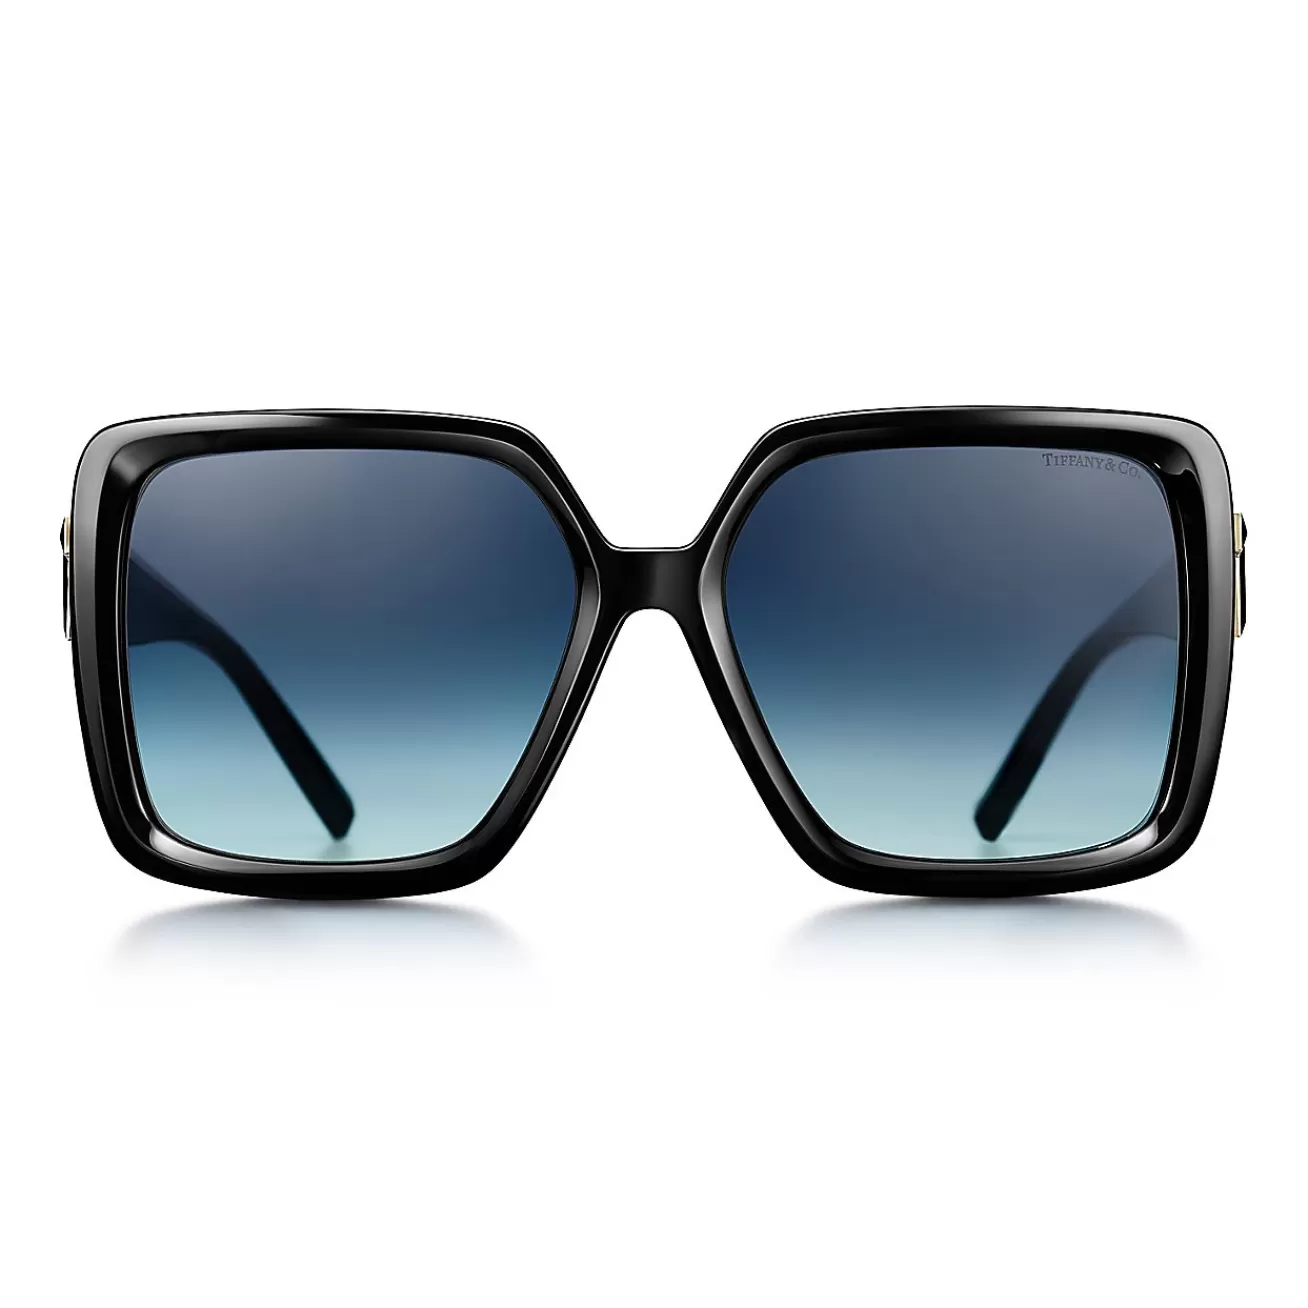 Tiffany & Co. Tiffany T Sunglasses in Black Acetate with Tiffany Blue® Lenses | ^Women Tiffany T | Gifts $1,500 & Under